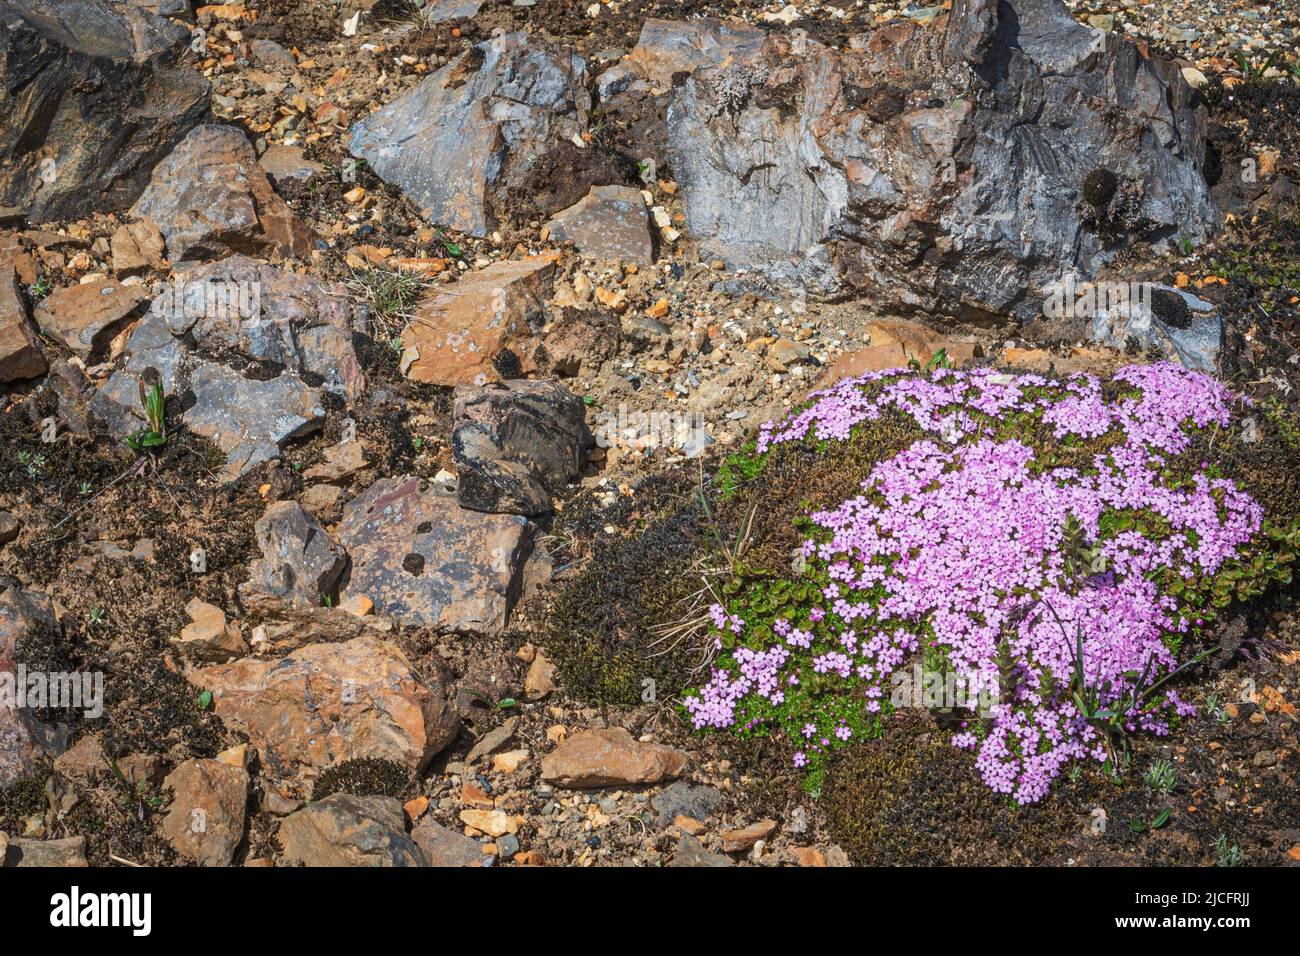 Laugavegur hiking trail is the most famous multi-day trekking tour in Iceland. Landscape photo from the area around Landmannalaugar, starting point of the long-distance hiking trail in the highlands of Iceland. Flowers along the path. Stock Photo